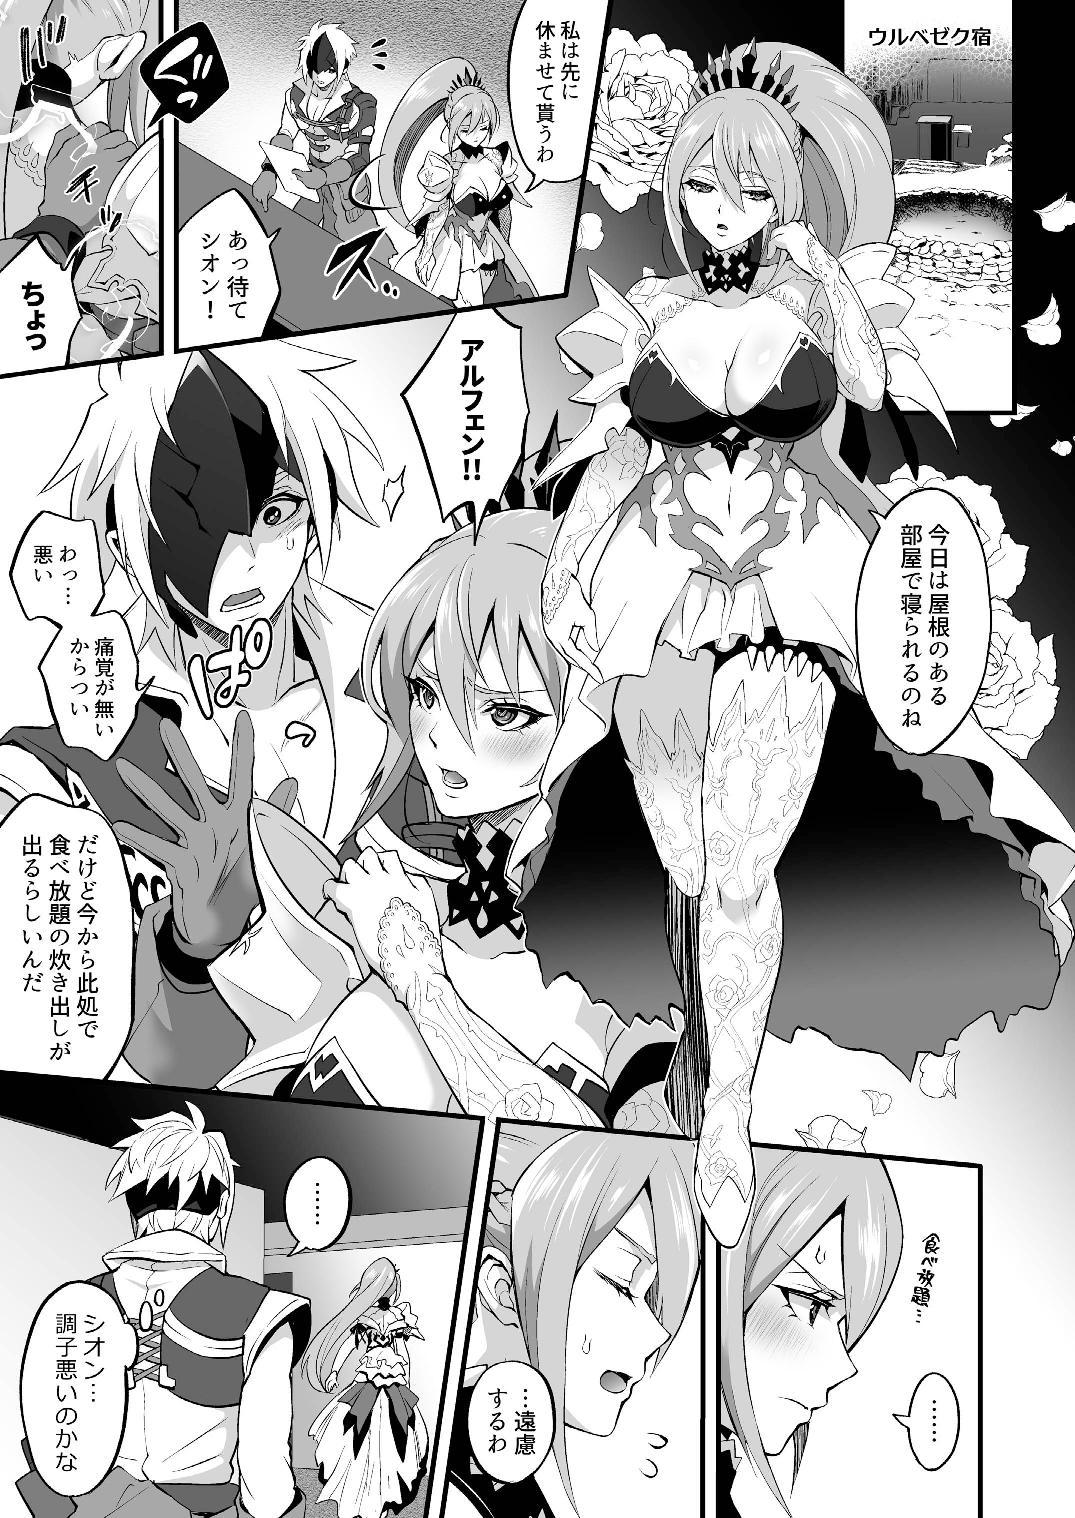 Lesbiansex 私に詰め寄ると〇〇〇がイくわよ…! - Tales of arise Deflowered - Page 3